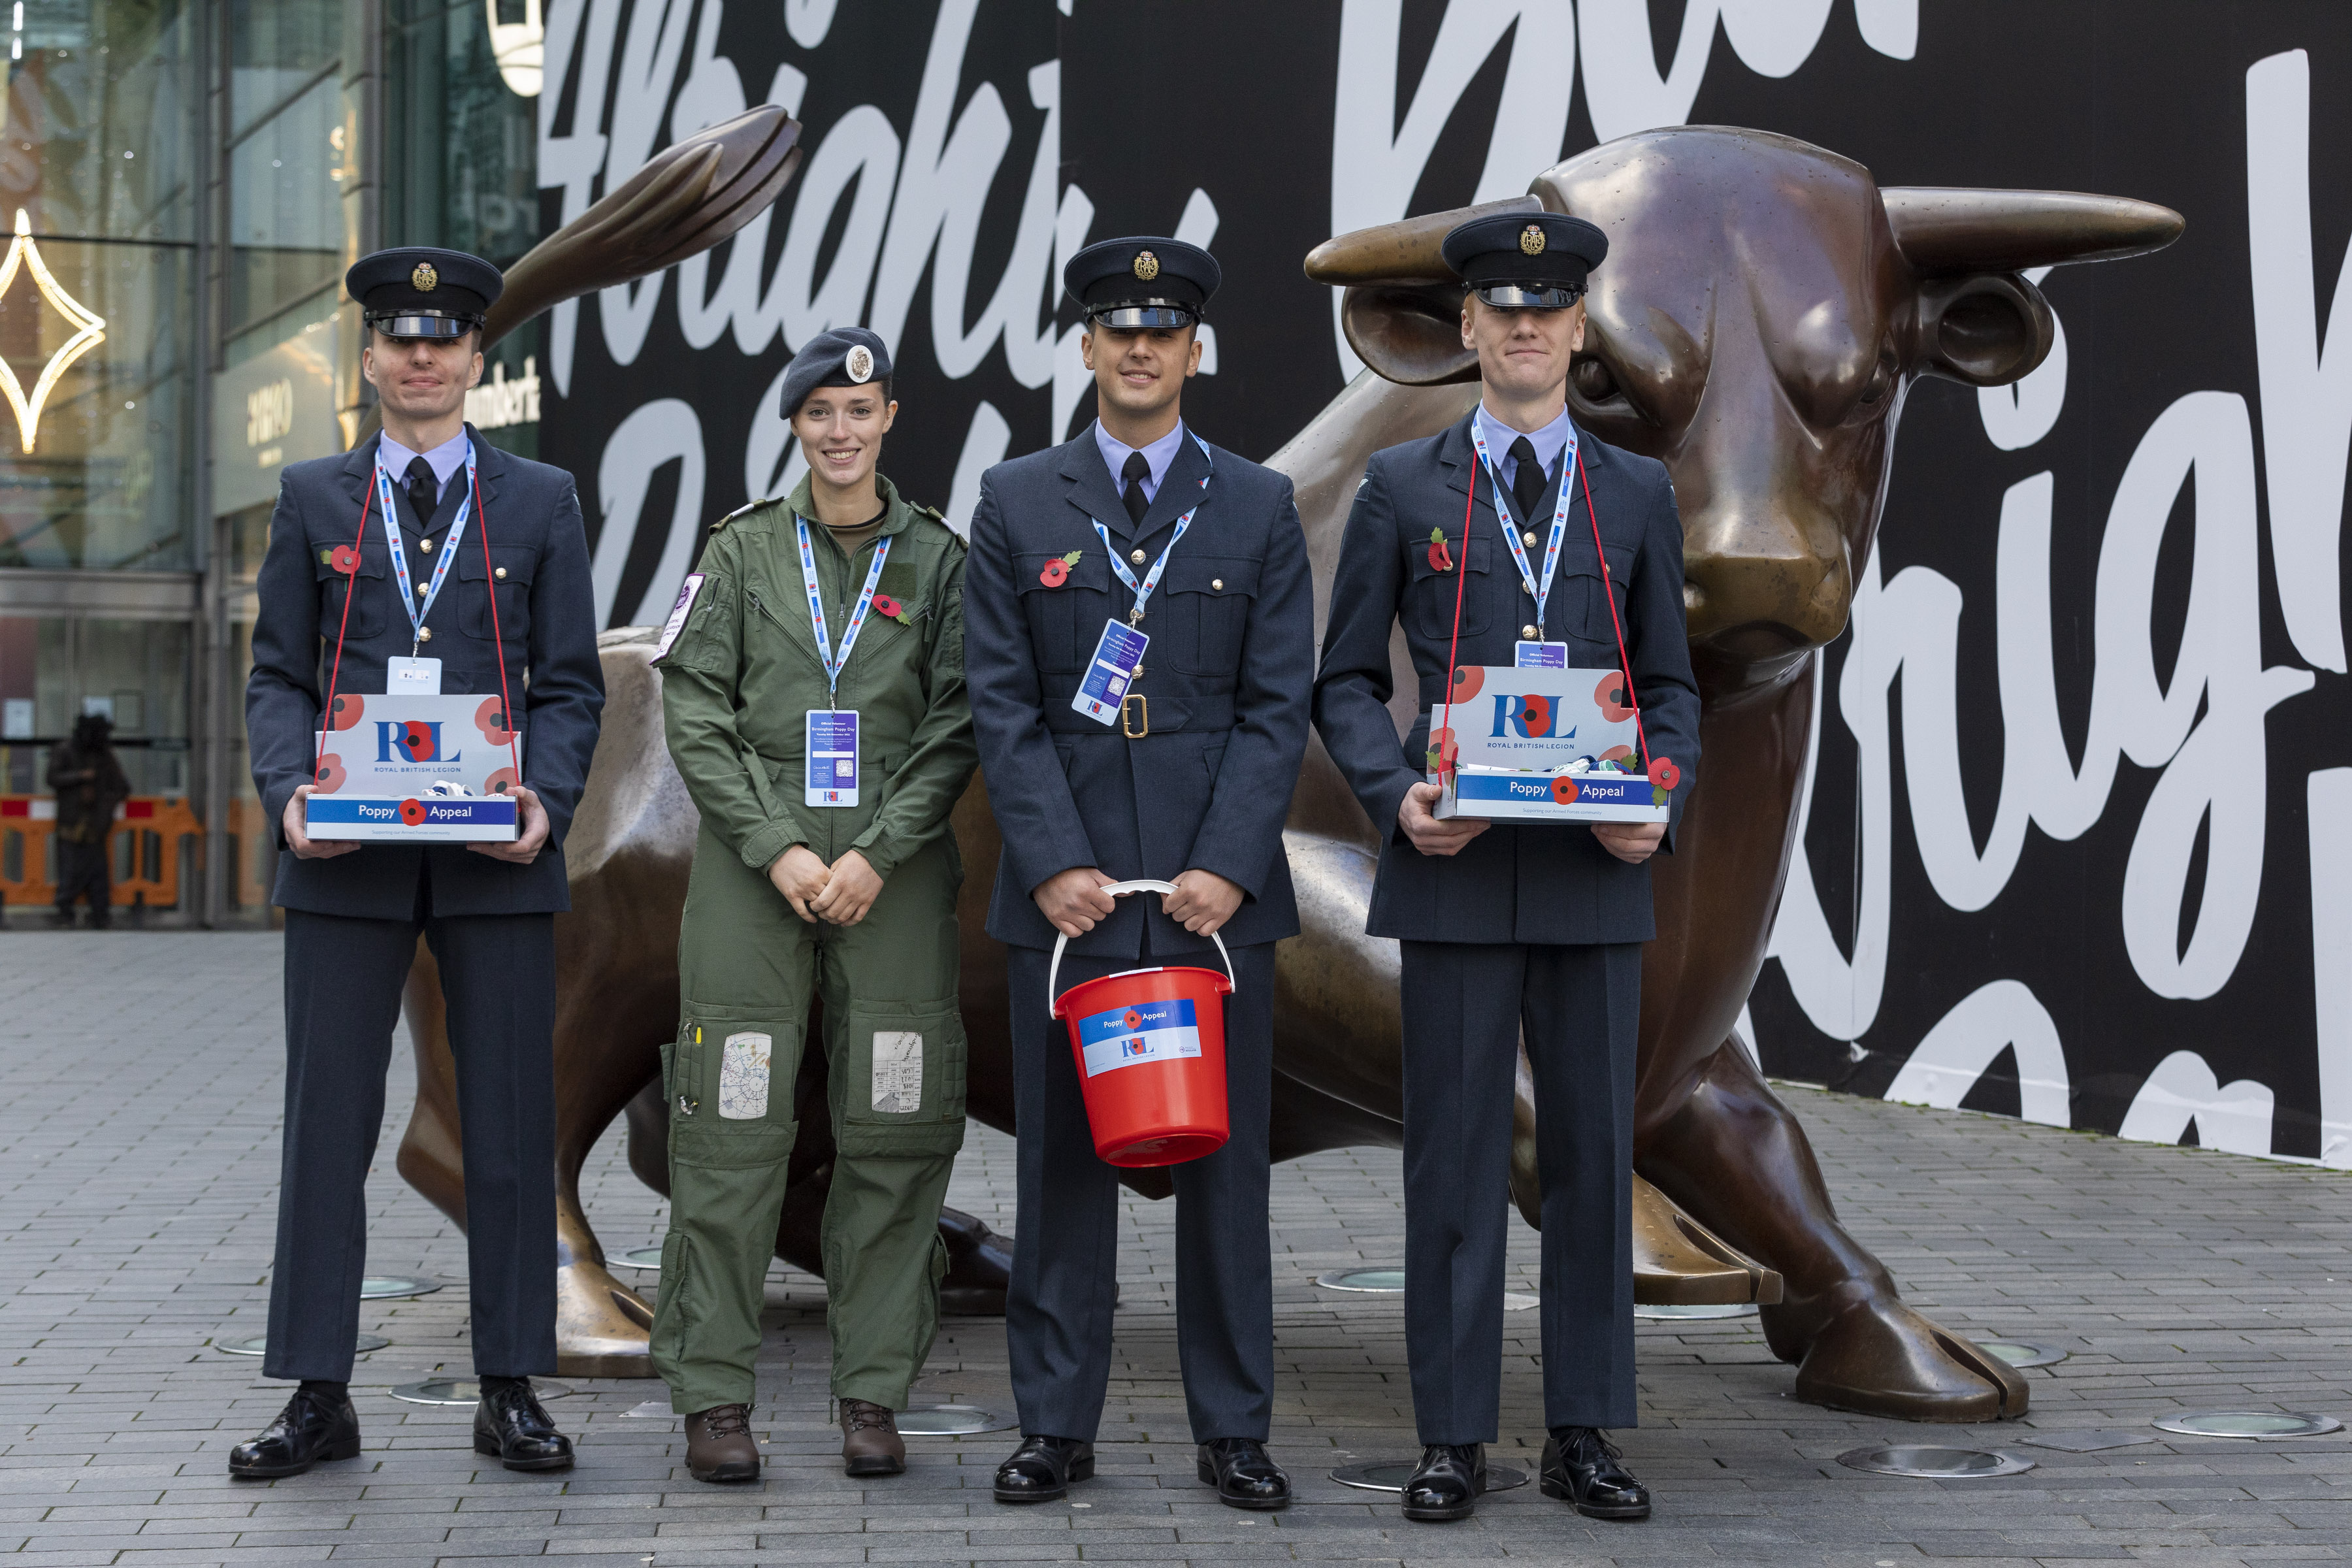 Image shows RAF aviators holding poppy collection boxes, by statue of bull in Birmingham.